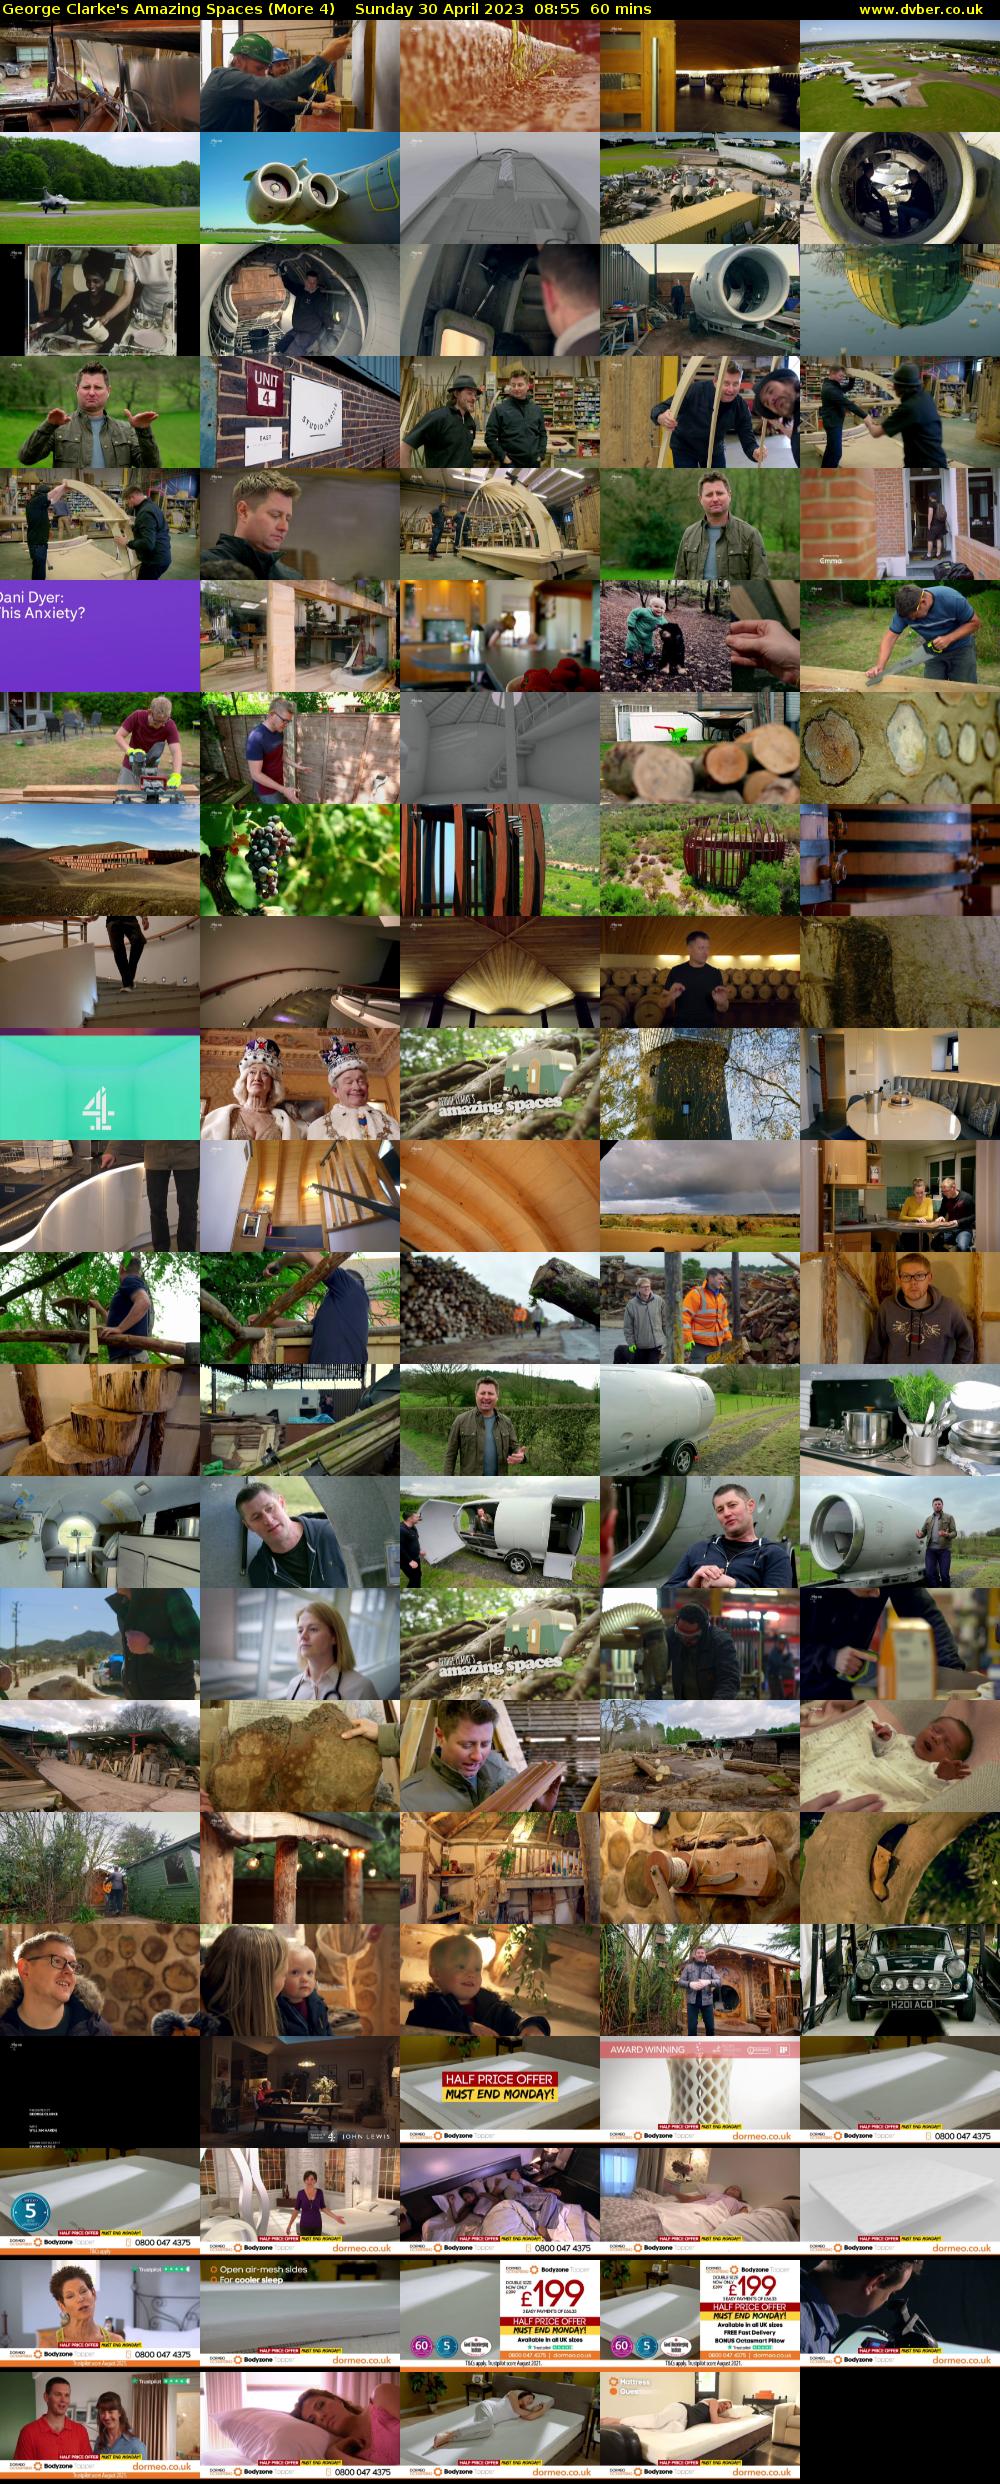 George Clarke's Amazing Spaces (More 4) Sunday 30 April 2023 08:55 - 09:55